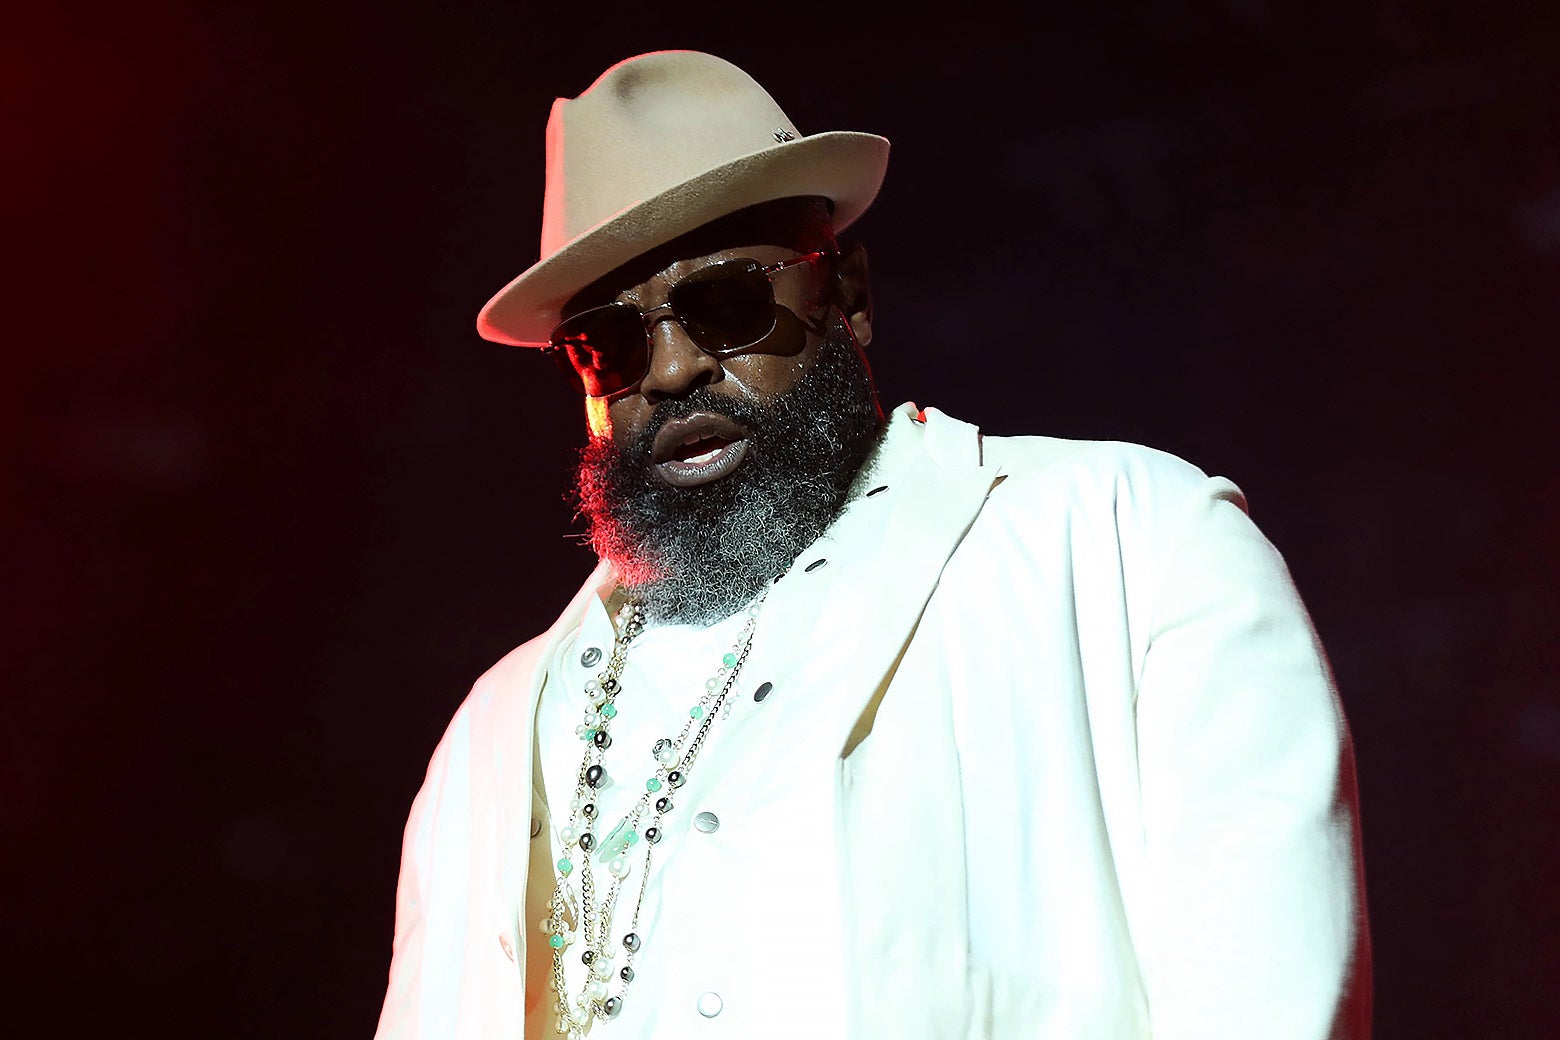 The rapper wears sunglasses, a thick beard, a tan hat cocked to one side, a white suit, and several colored stone necklaces